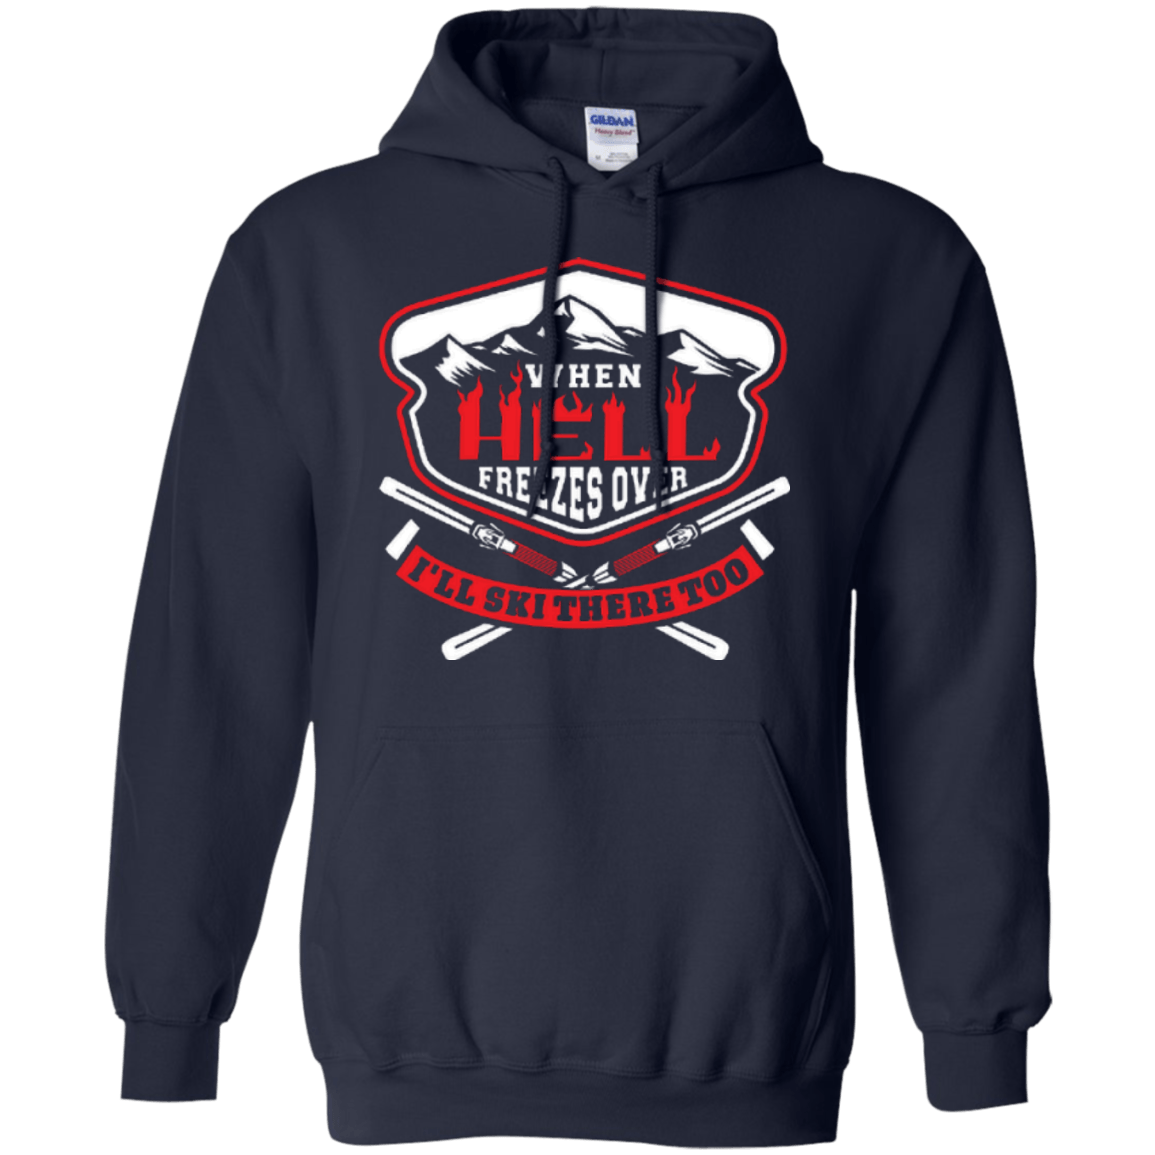 When Hell Freezes Over I'll Ski There Too Hoodies - Powderaddicts